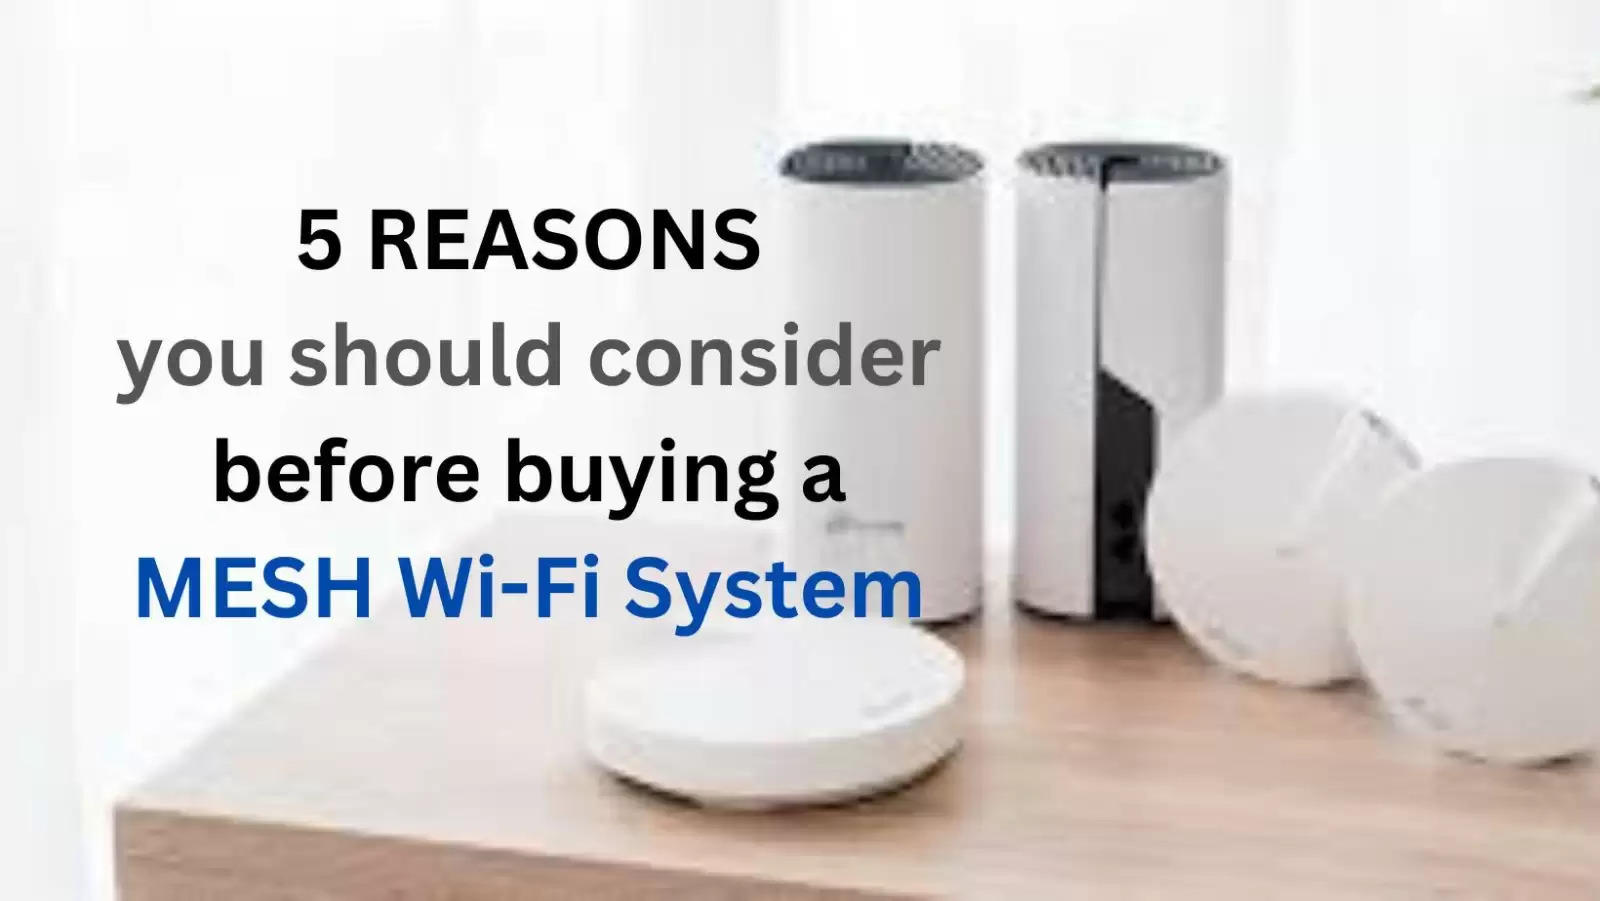 5 Reasons You Should Consider Before Buying a Mesh WiFi System